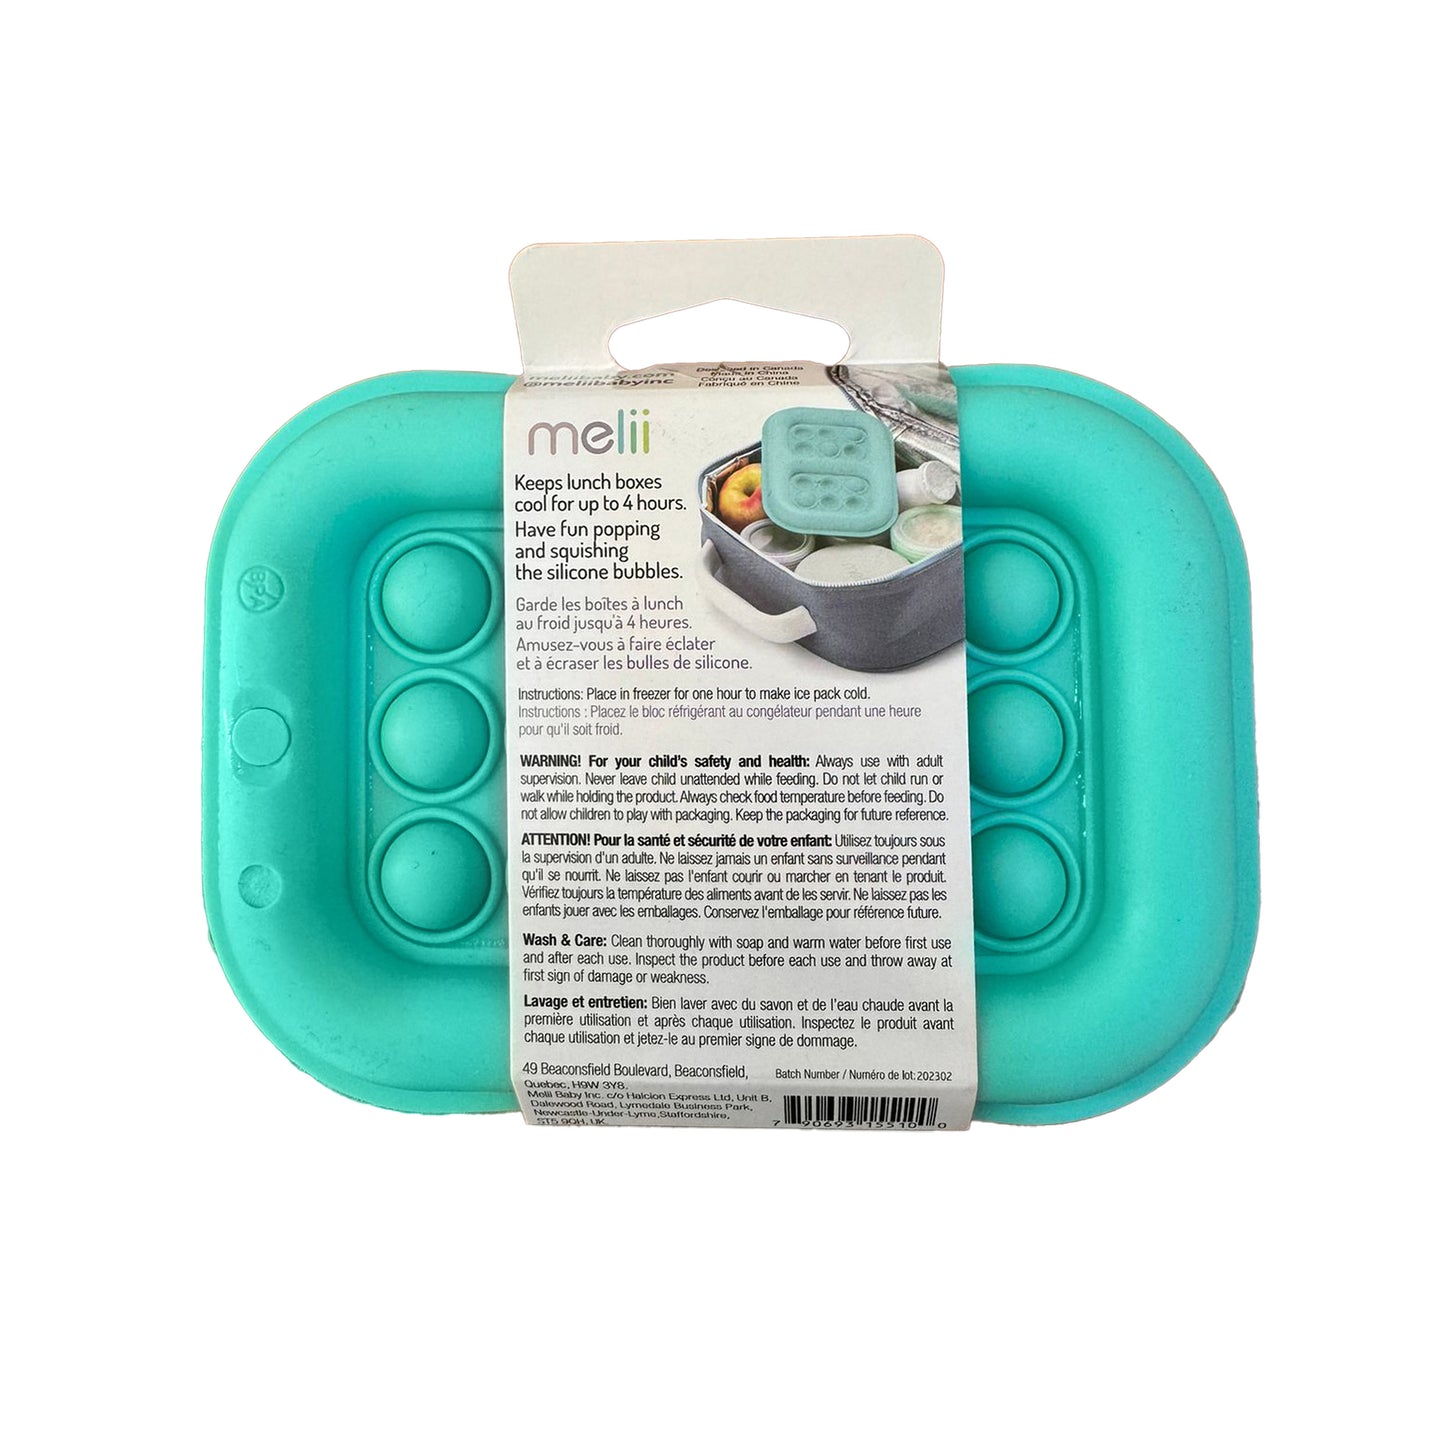 melii Turquoise Pop It Ice Pack for Kids - Dual Purpose Fidget Toy and Cooling Solution - Reusable, Slim Design - Keeps Meals Fresh for up to 4 Hours - Perfect for Snack Time, Lunch Boxes